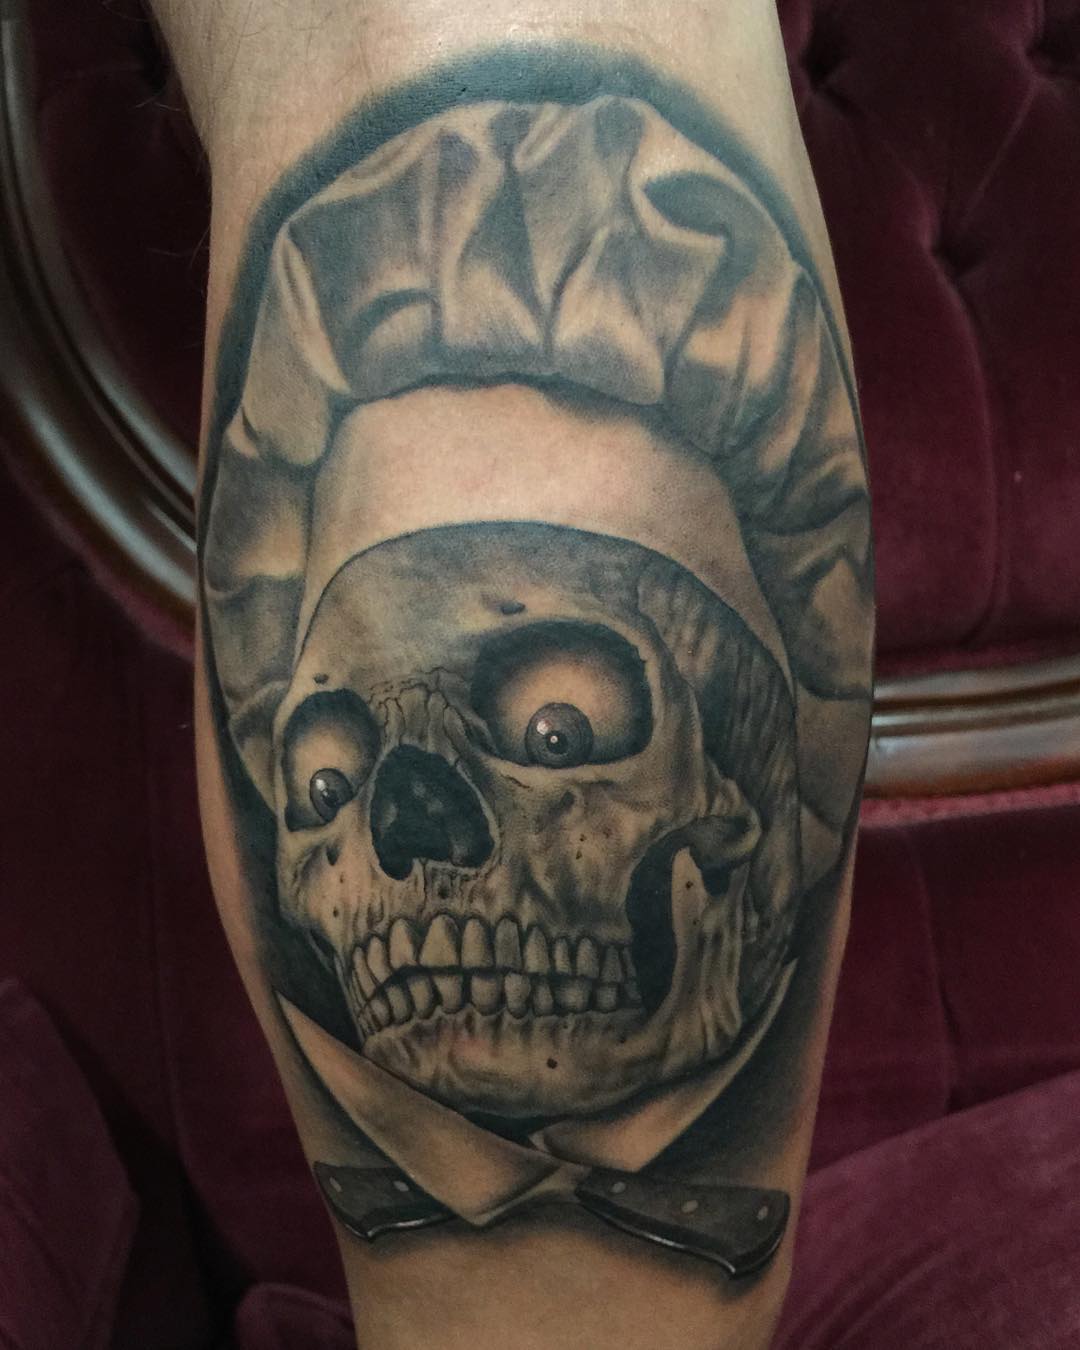 the skull in chef's hat with crazy eyes and two knifes